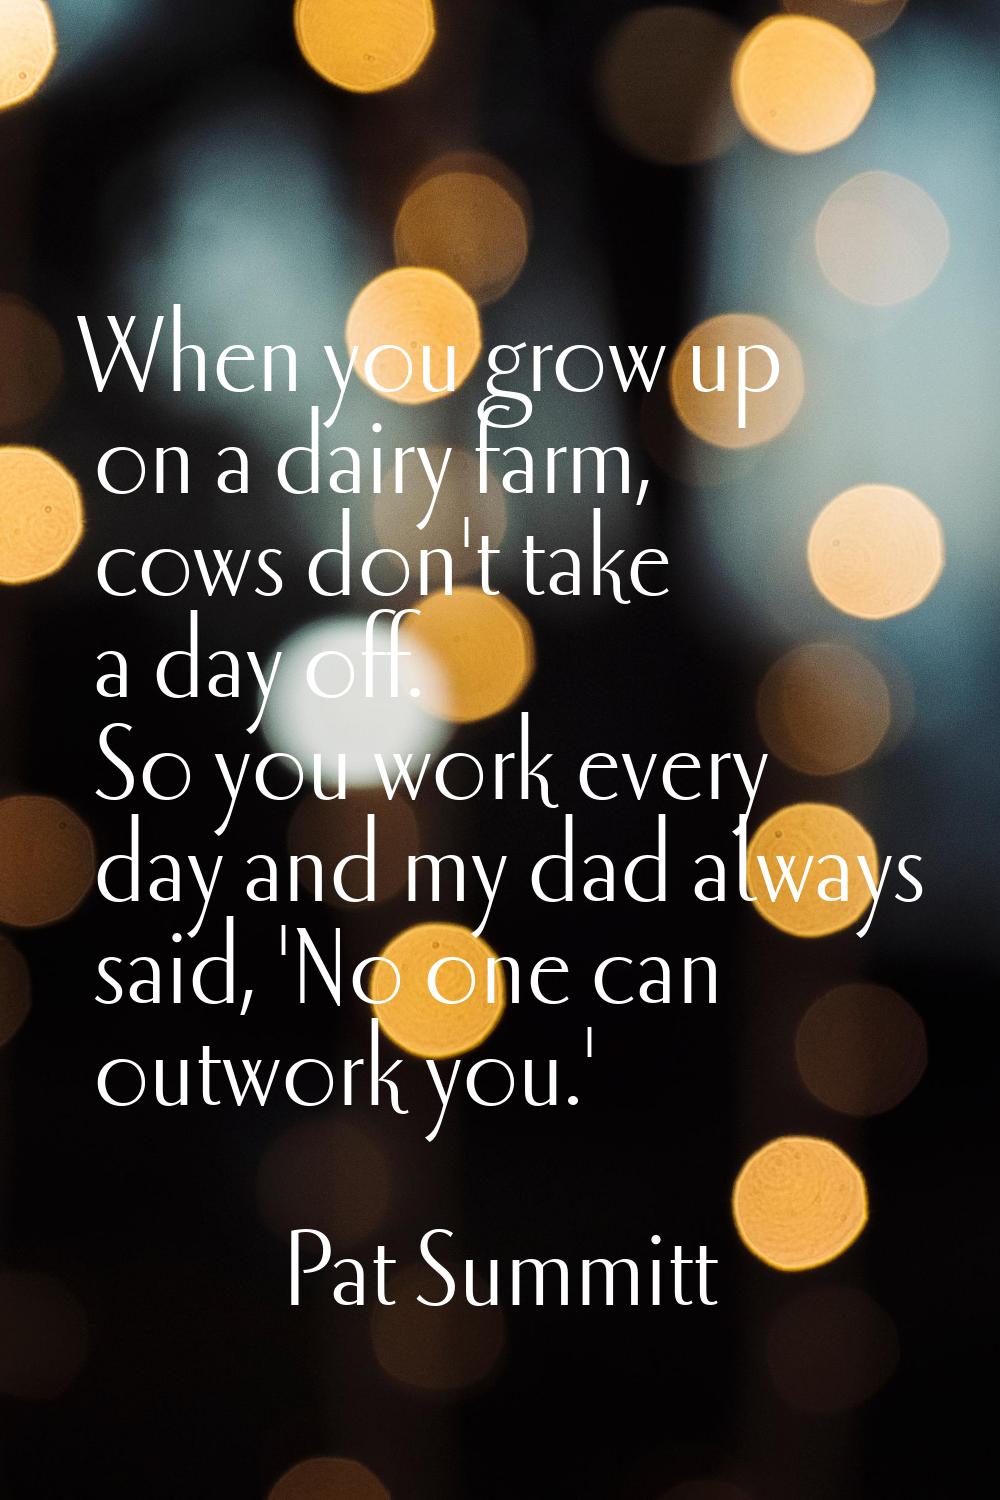 When you grow up on a dairy farm, cows don't take a day off. So you work every day and my dad alway